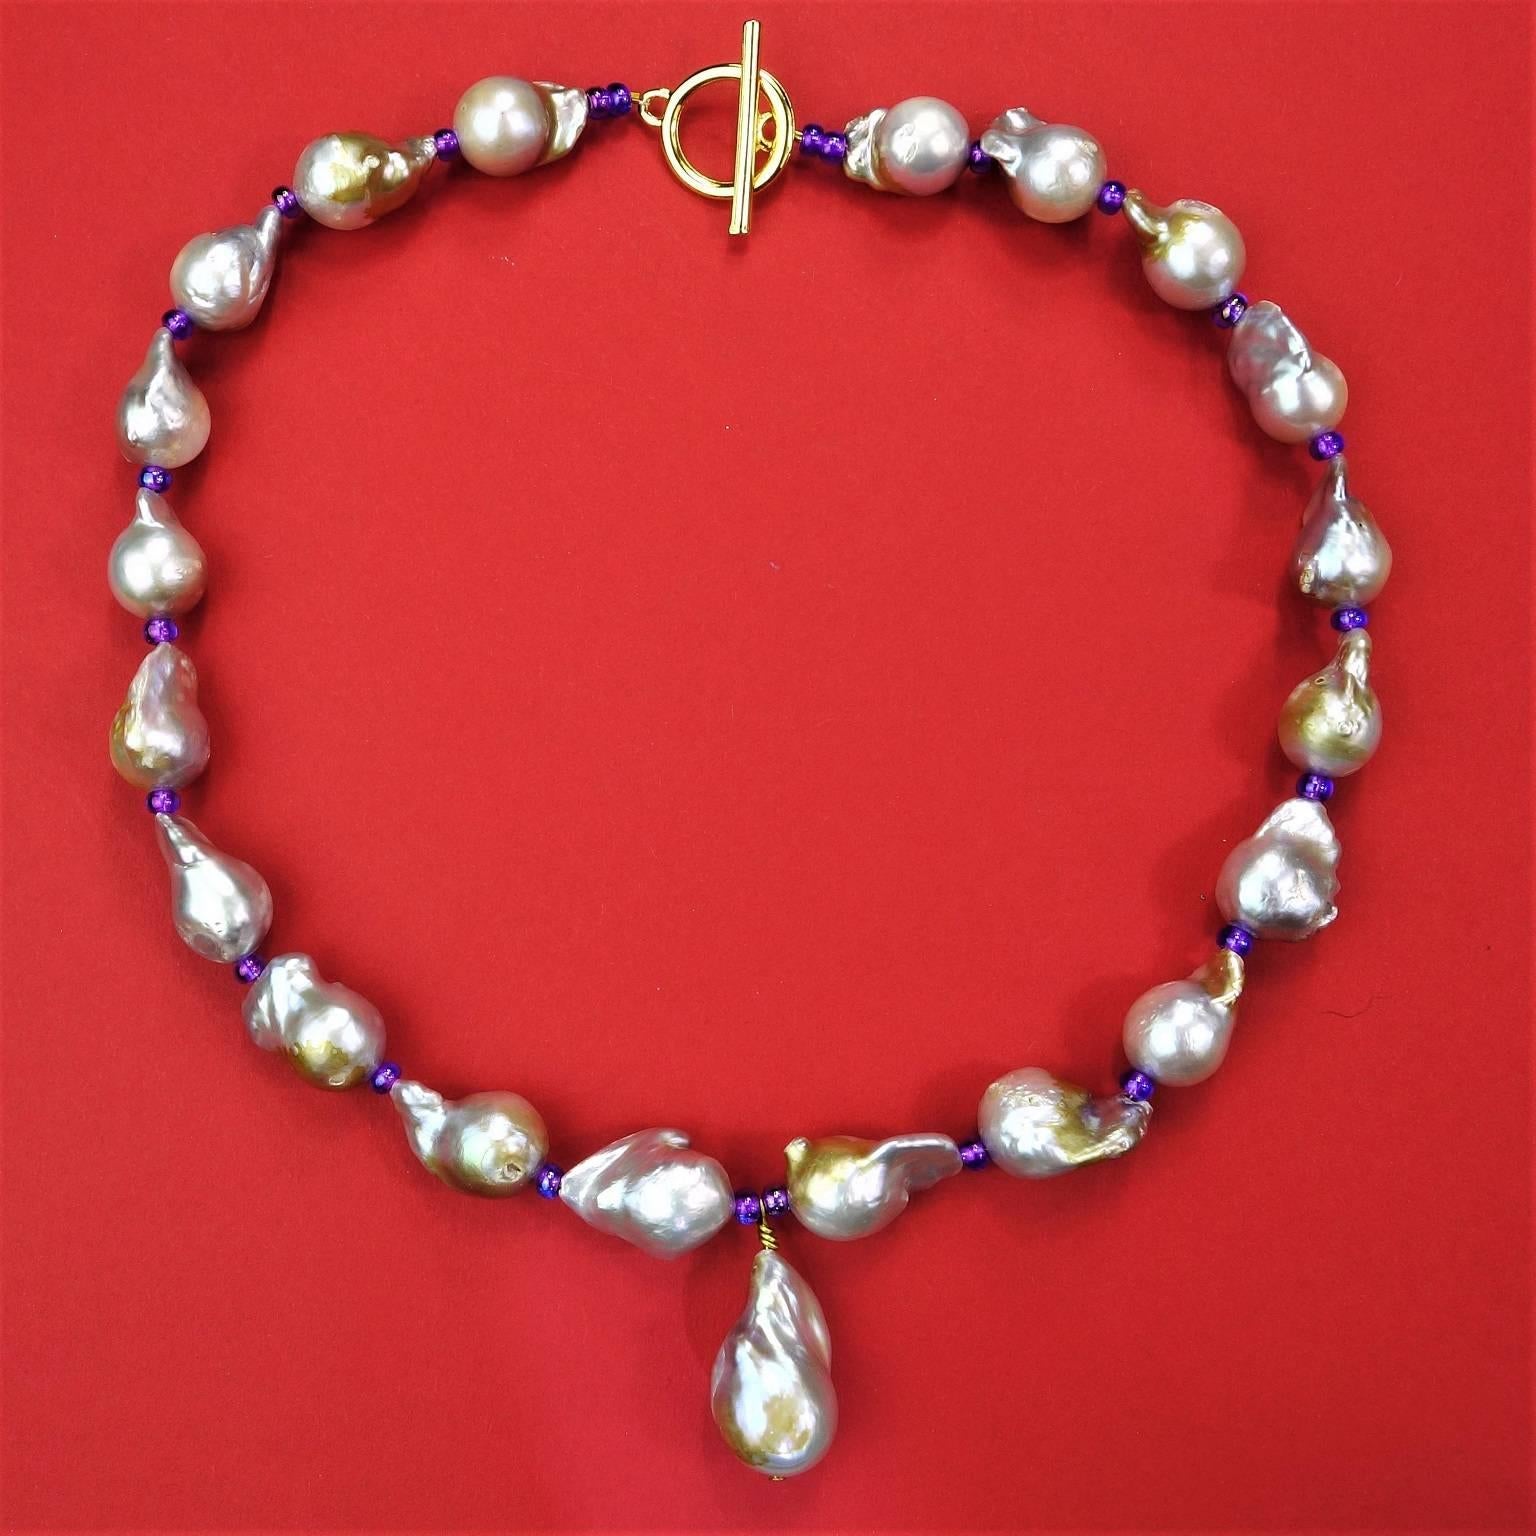 Bead Gemjunky Baroque Pearl Necklace with Center Pearl Dangle